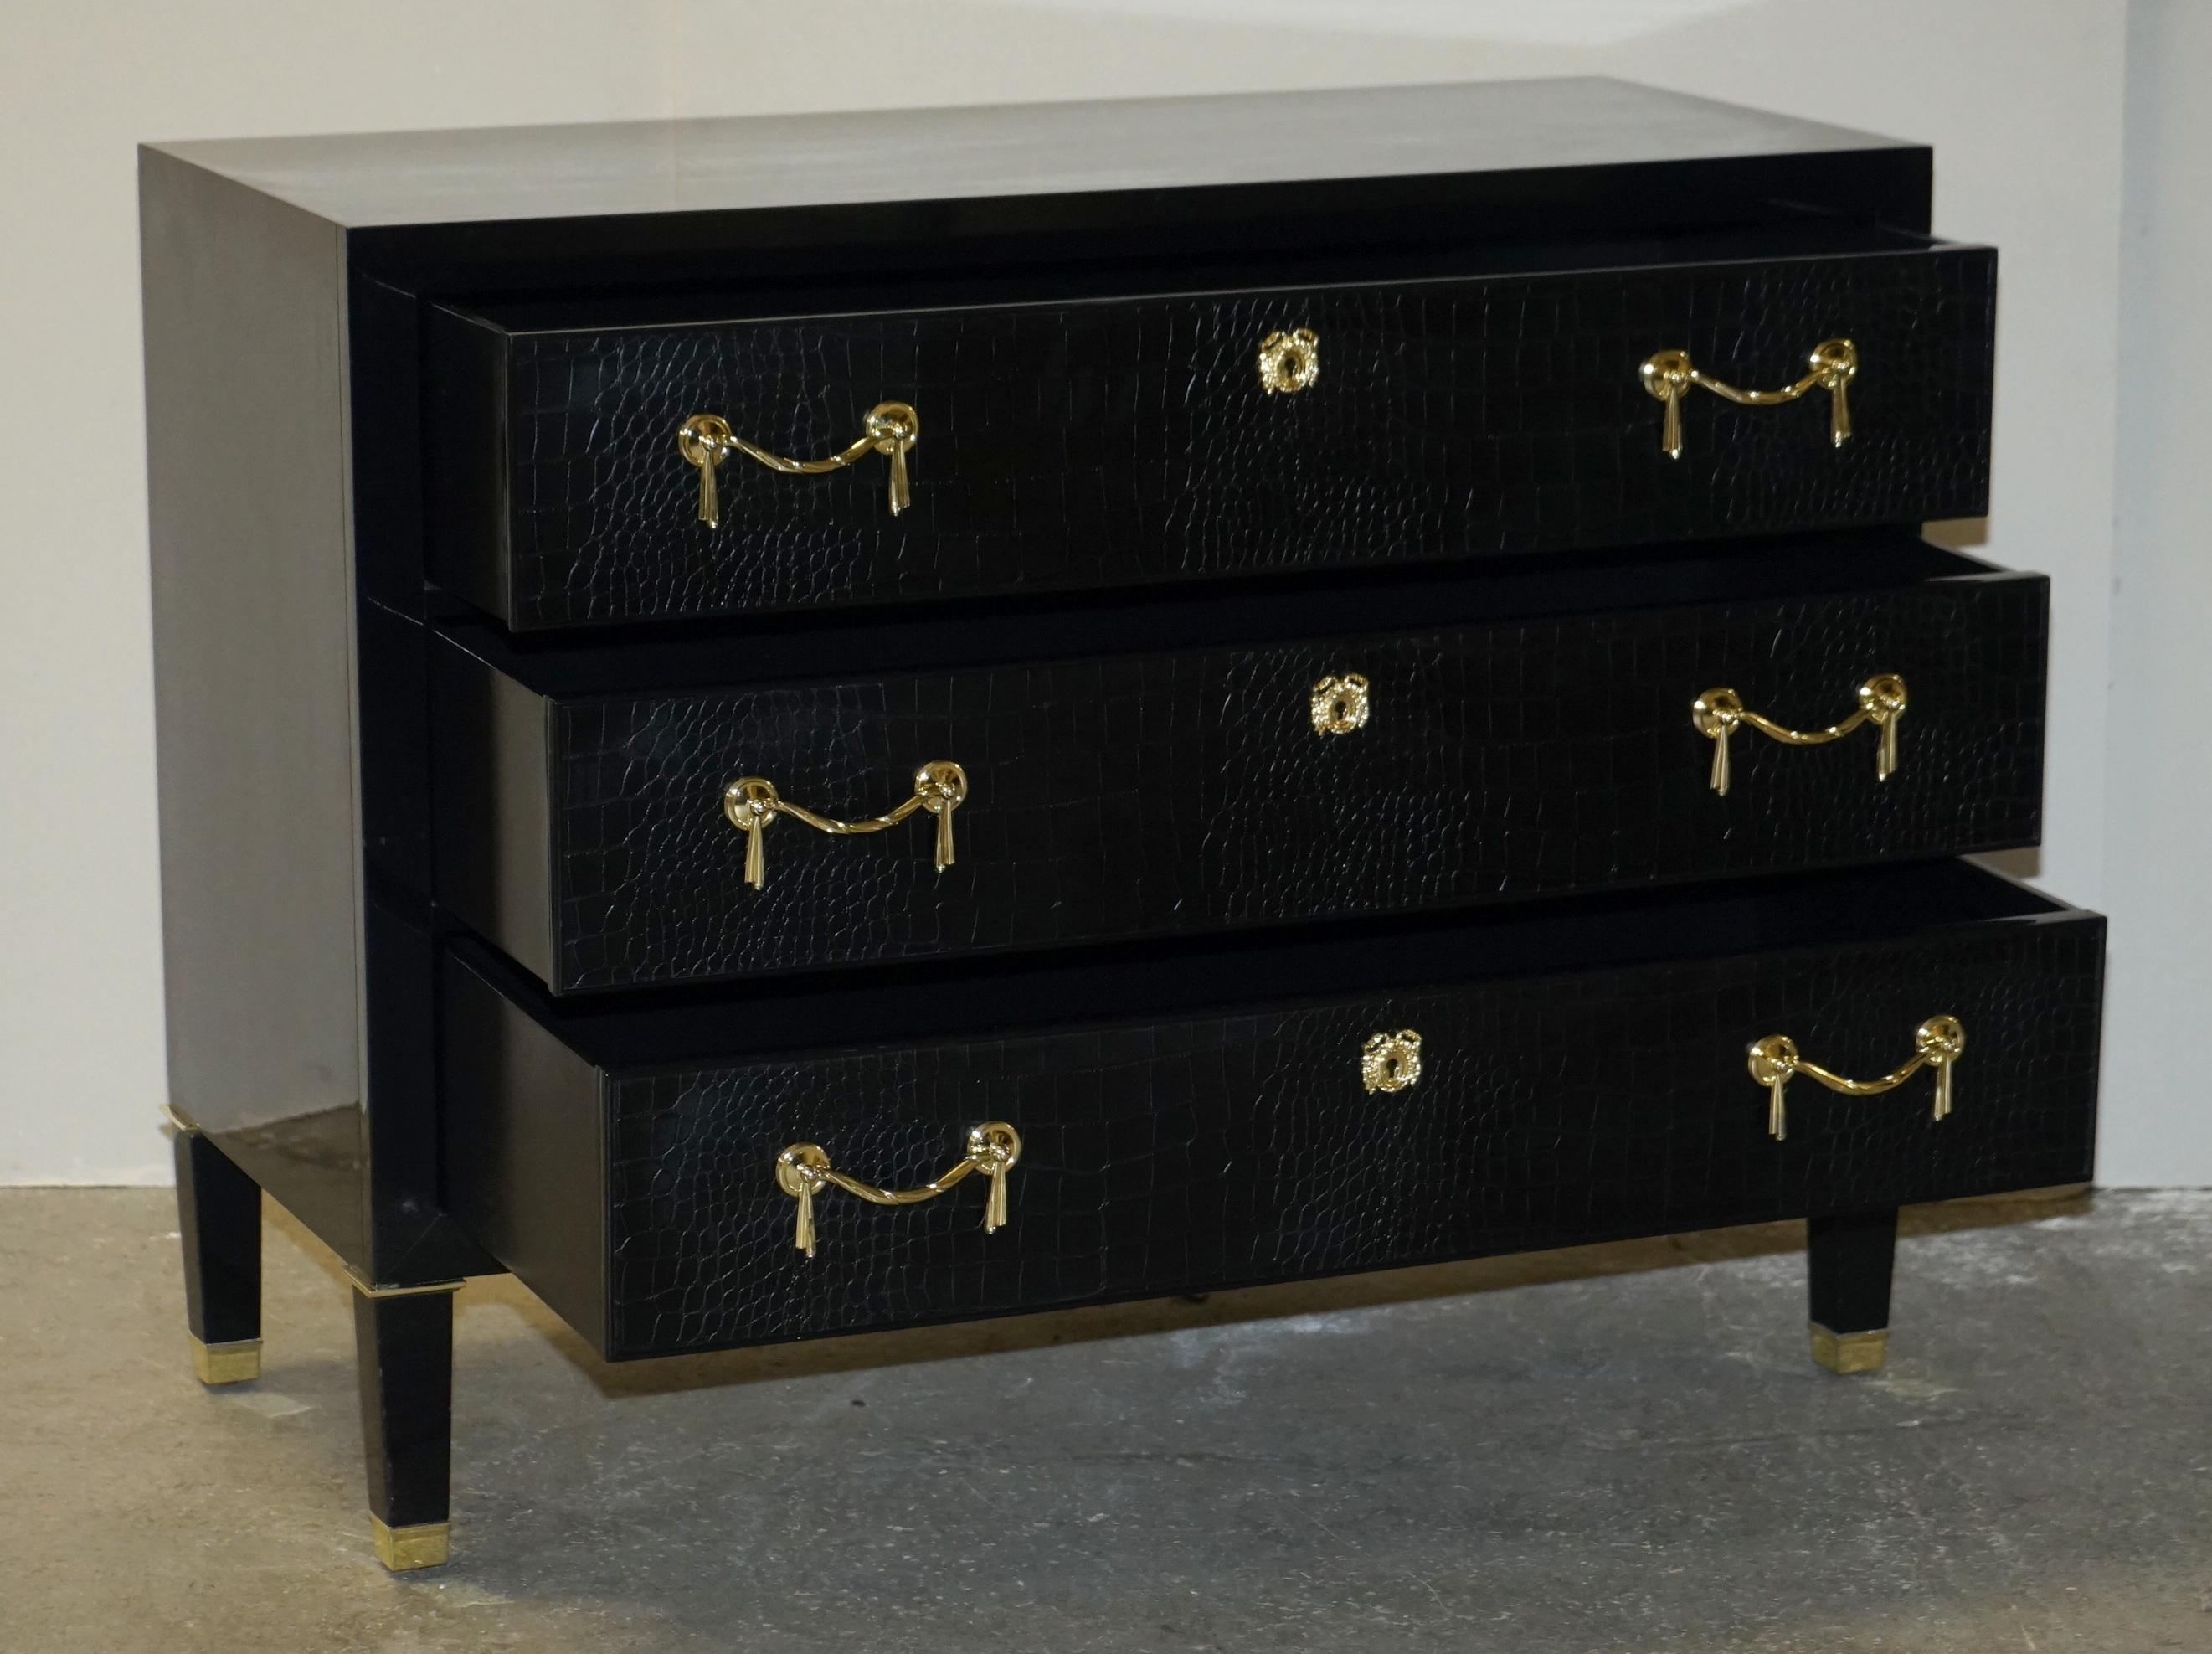 PAIR OF RALPH LAUREN BROOK STREET CHEST OF DRAWERS ALLiGATOR LEATHER 11